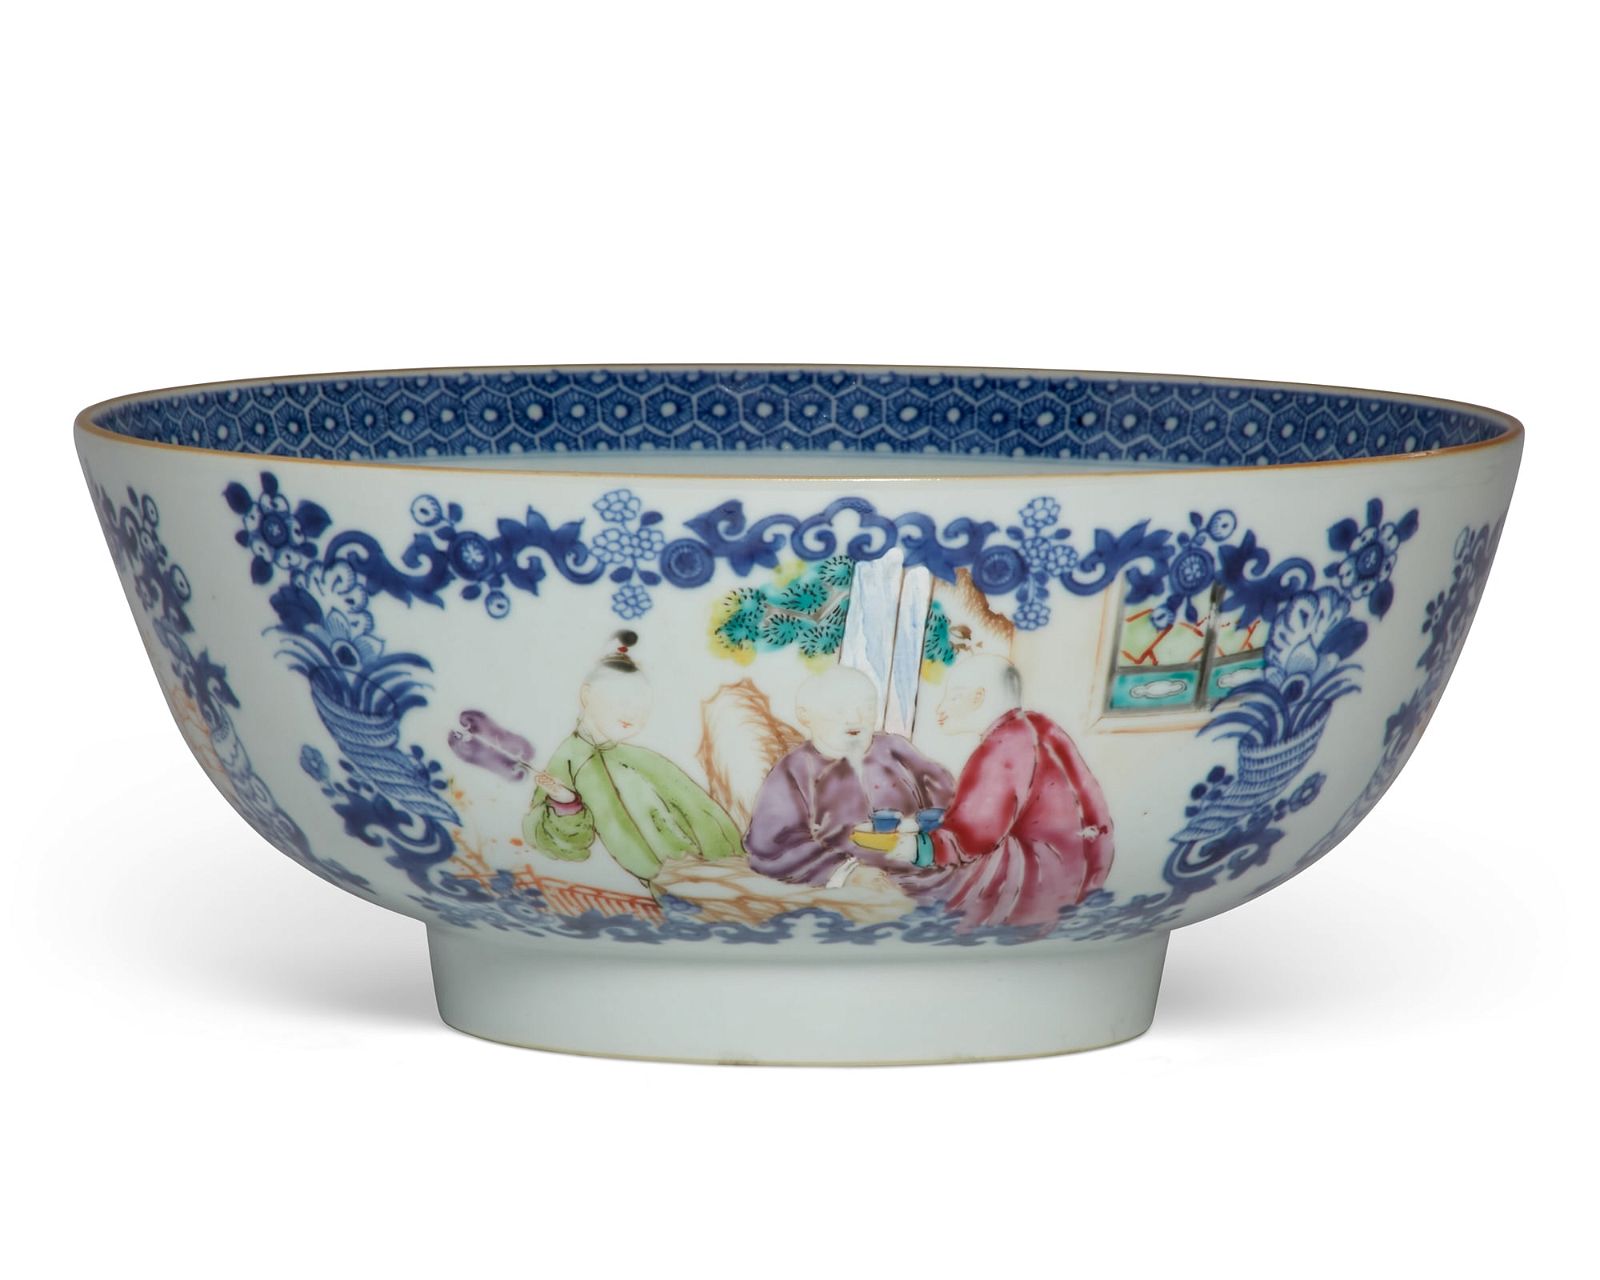 A CHINESE EXPORT ENAMELED PORCELAIN